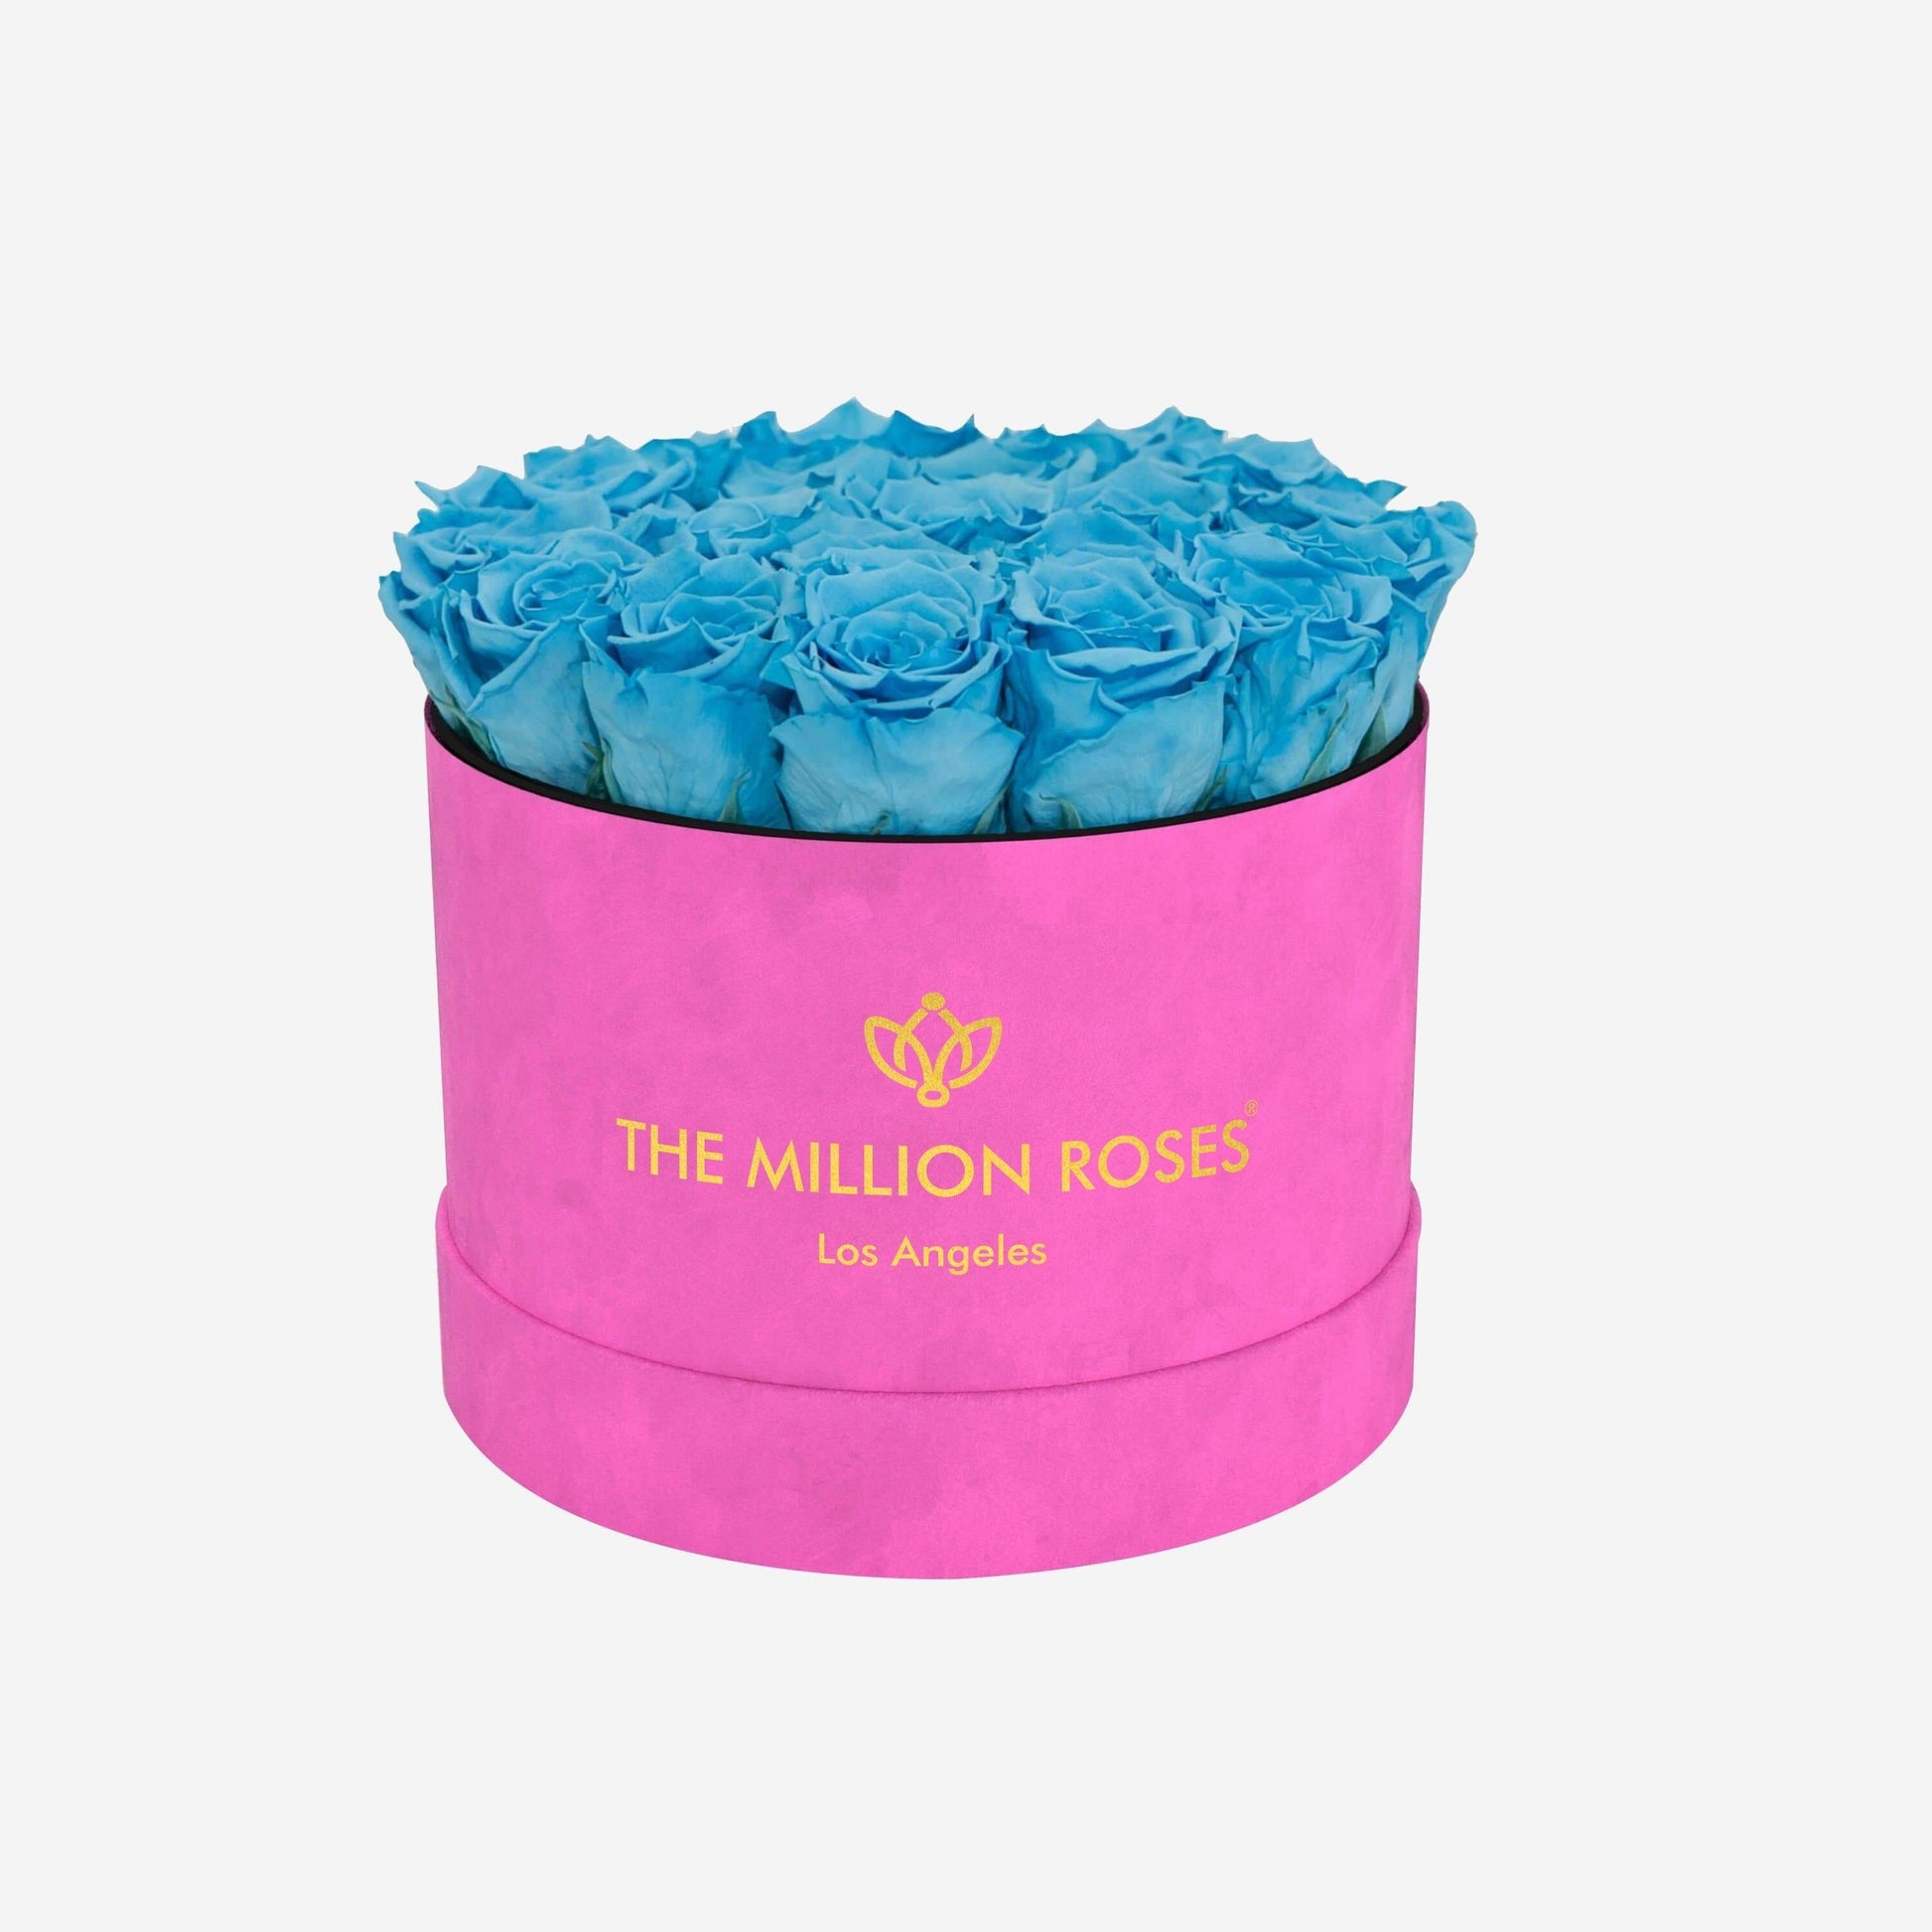 Classic Hot Pink Suede Box | Light Blue Roses - The Million Roses